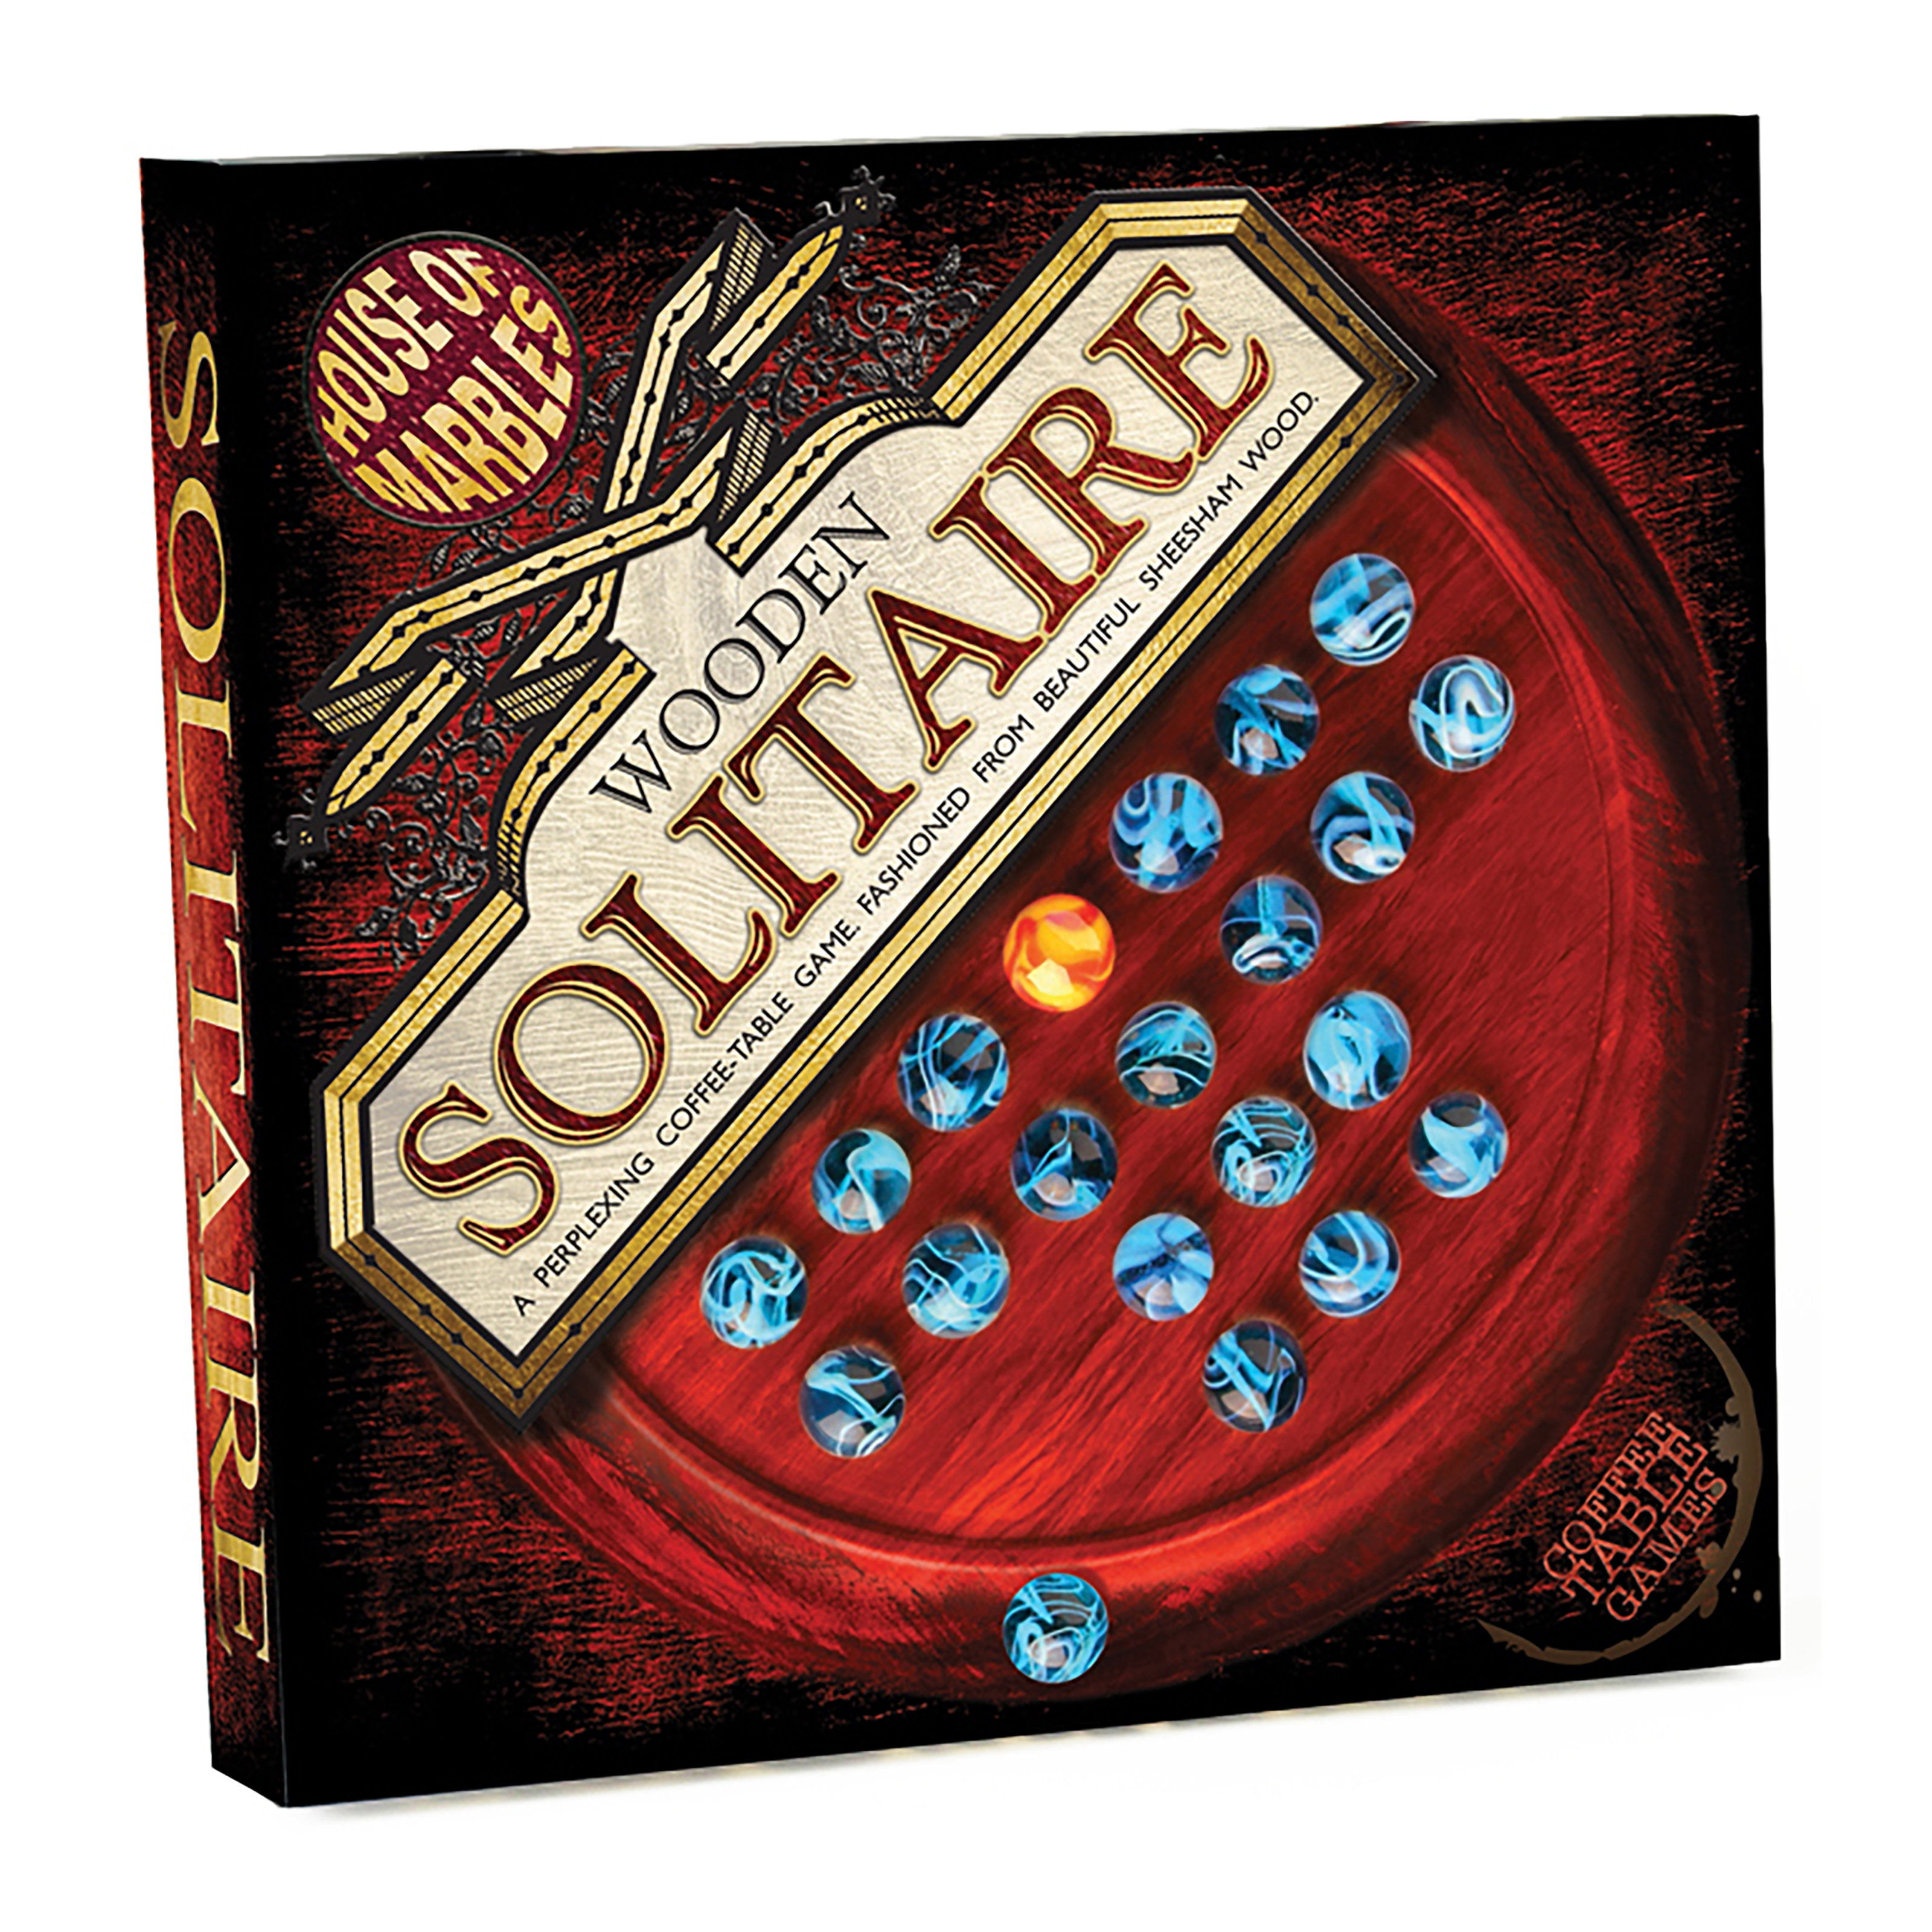 Carousel Solitaire - Play Online